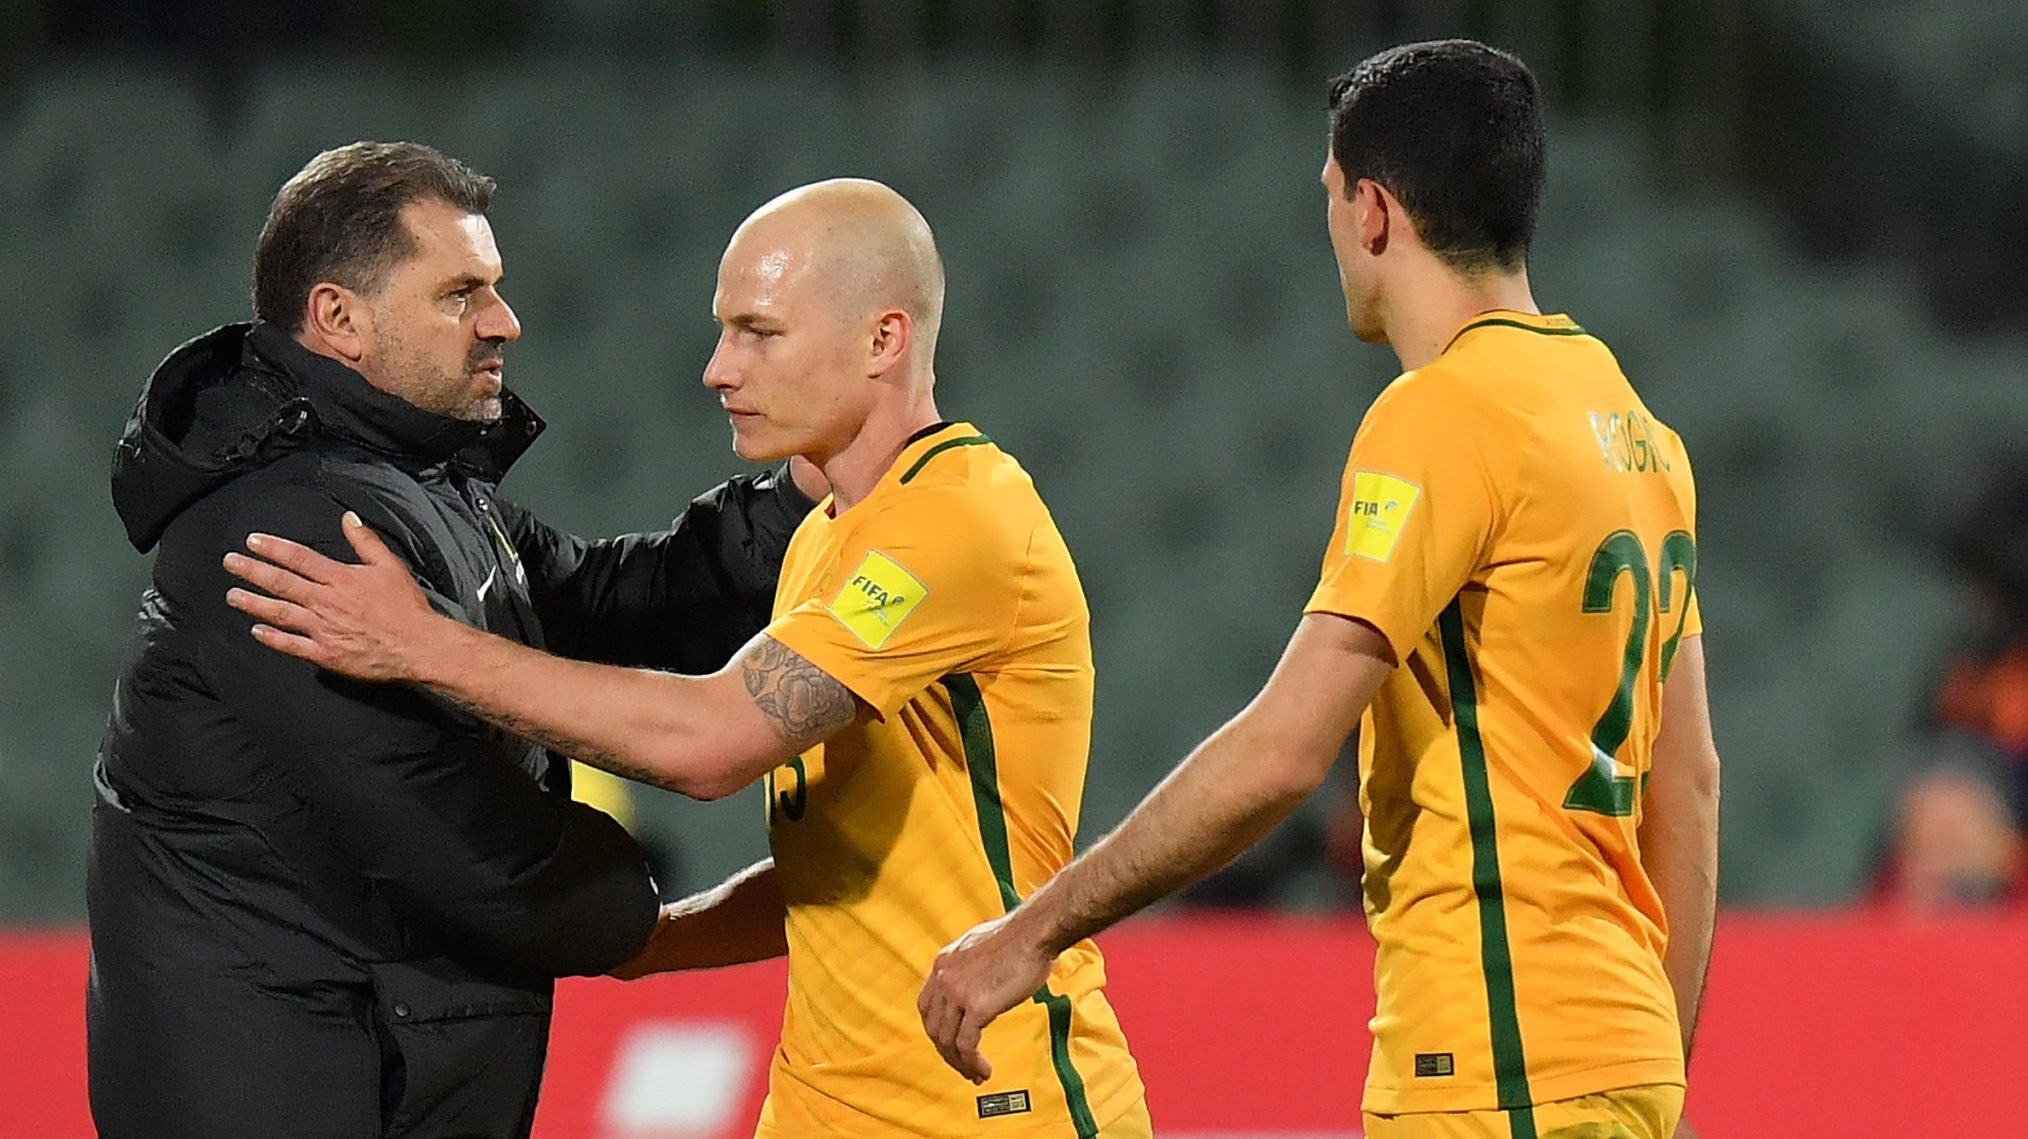 Ange Postecoglou refuses to be drawn on Mooy and Ryan but does reaffirm global Celtic transfer strategy